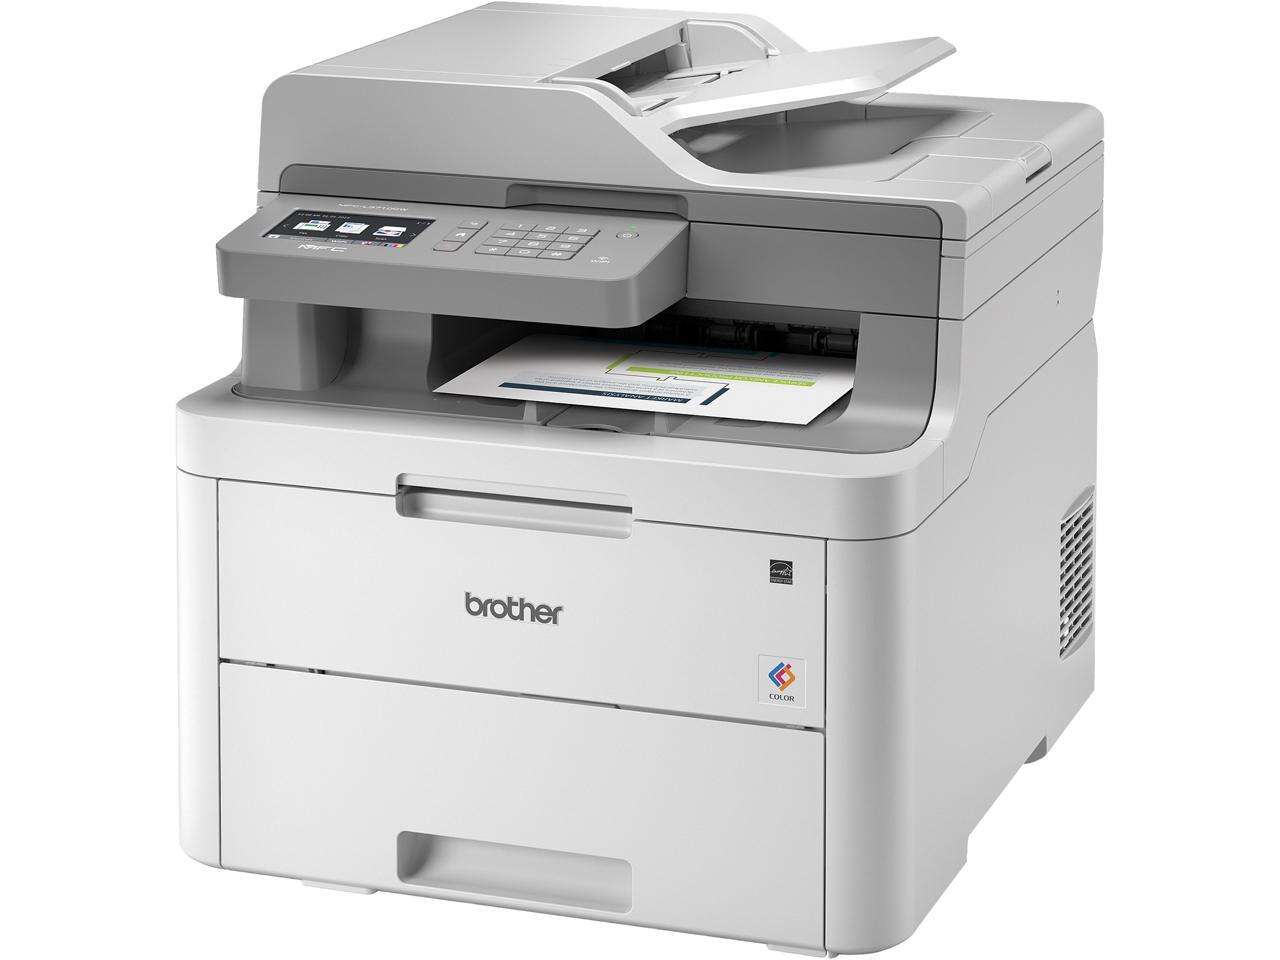 Brother MFC-L3710CW Wireless Compact Digital Color All-in-One Printer Providing Laser Printer Quality Results